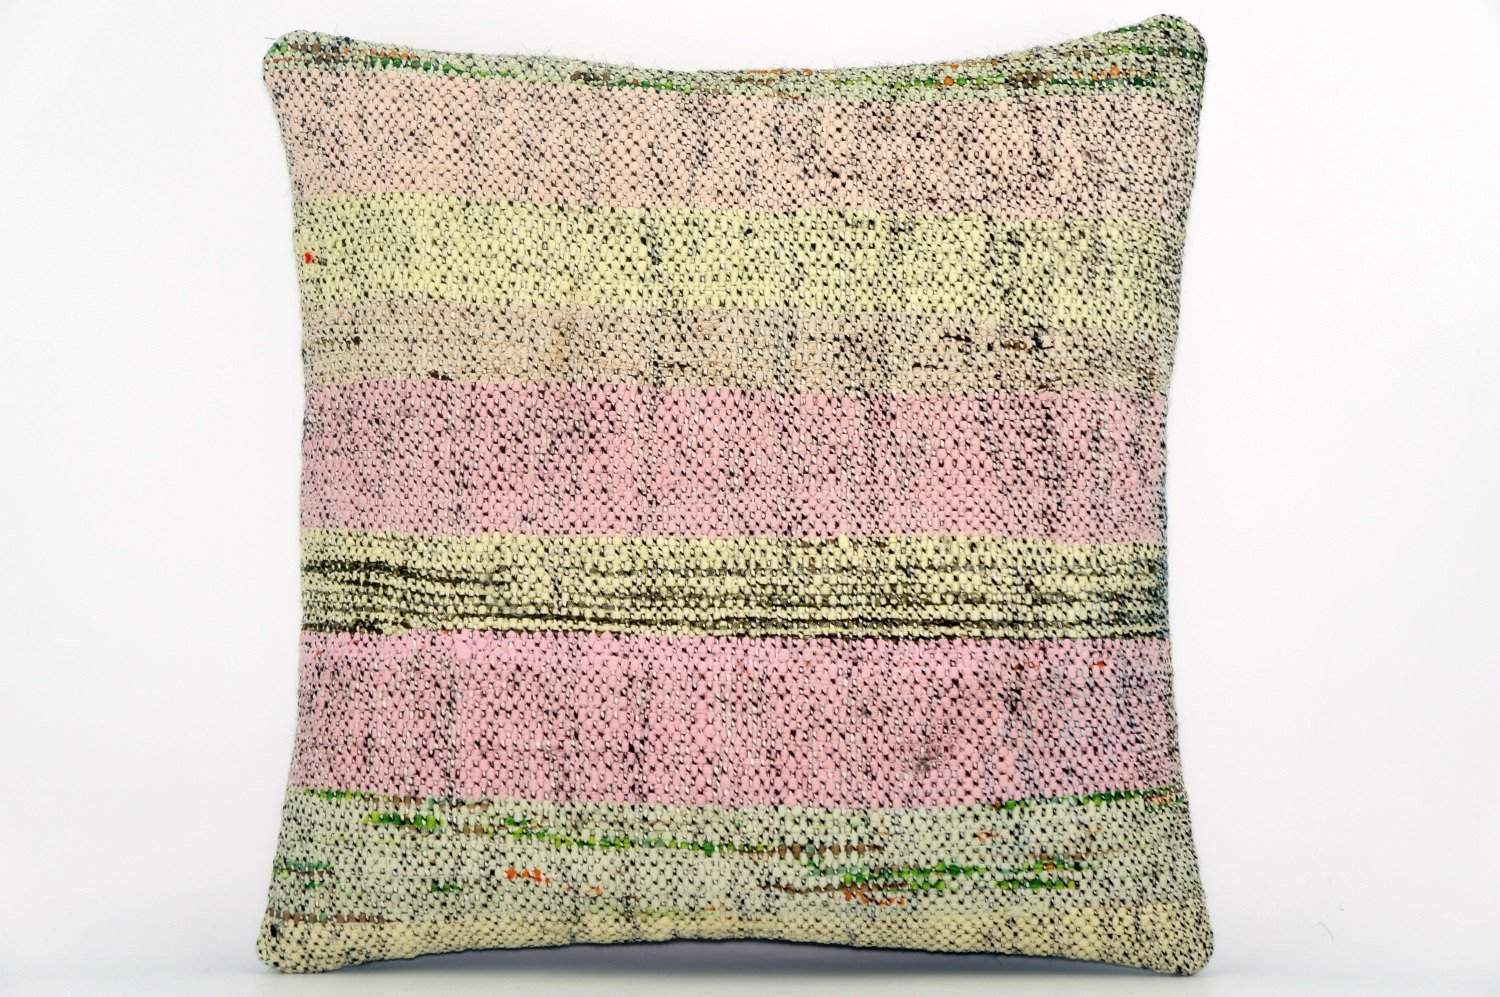 CLEARANCE Handwoven hemp pillow green pink yellow , Decorative Kilim pillow cover  1572_A - kilimpillowstore
 - 1